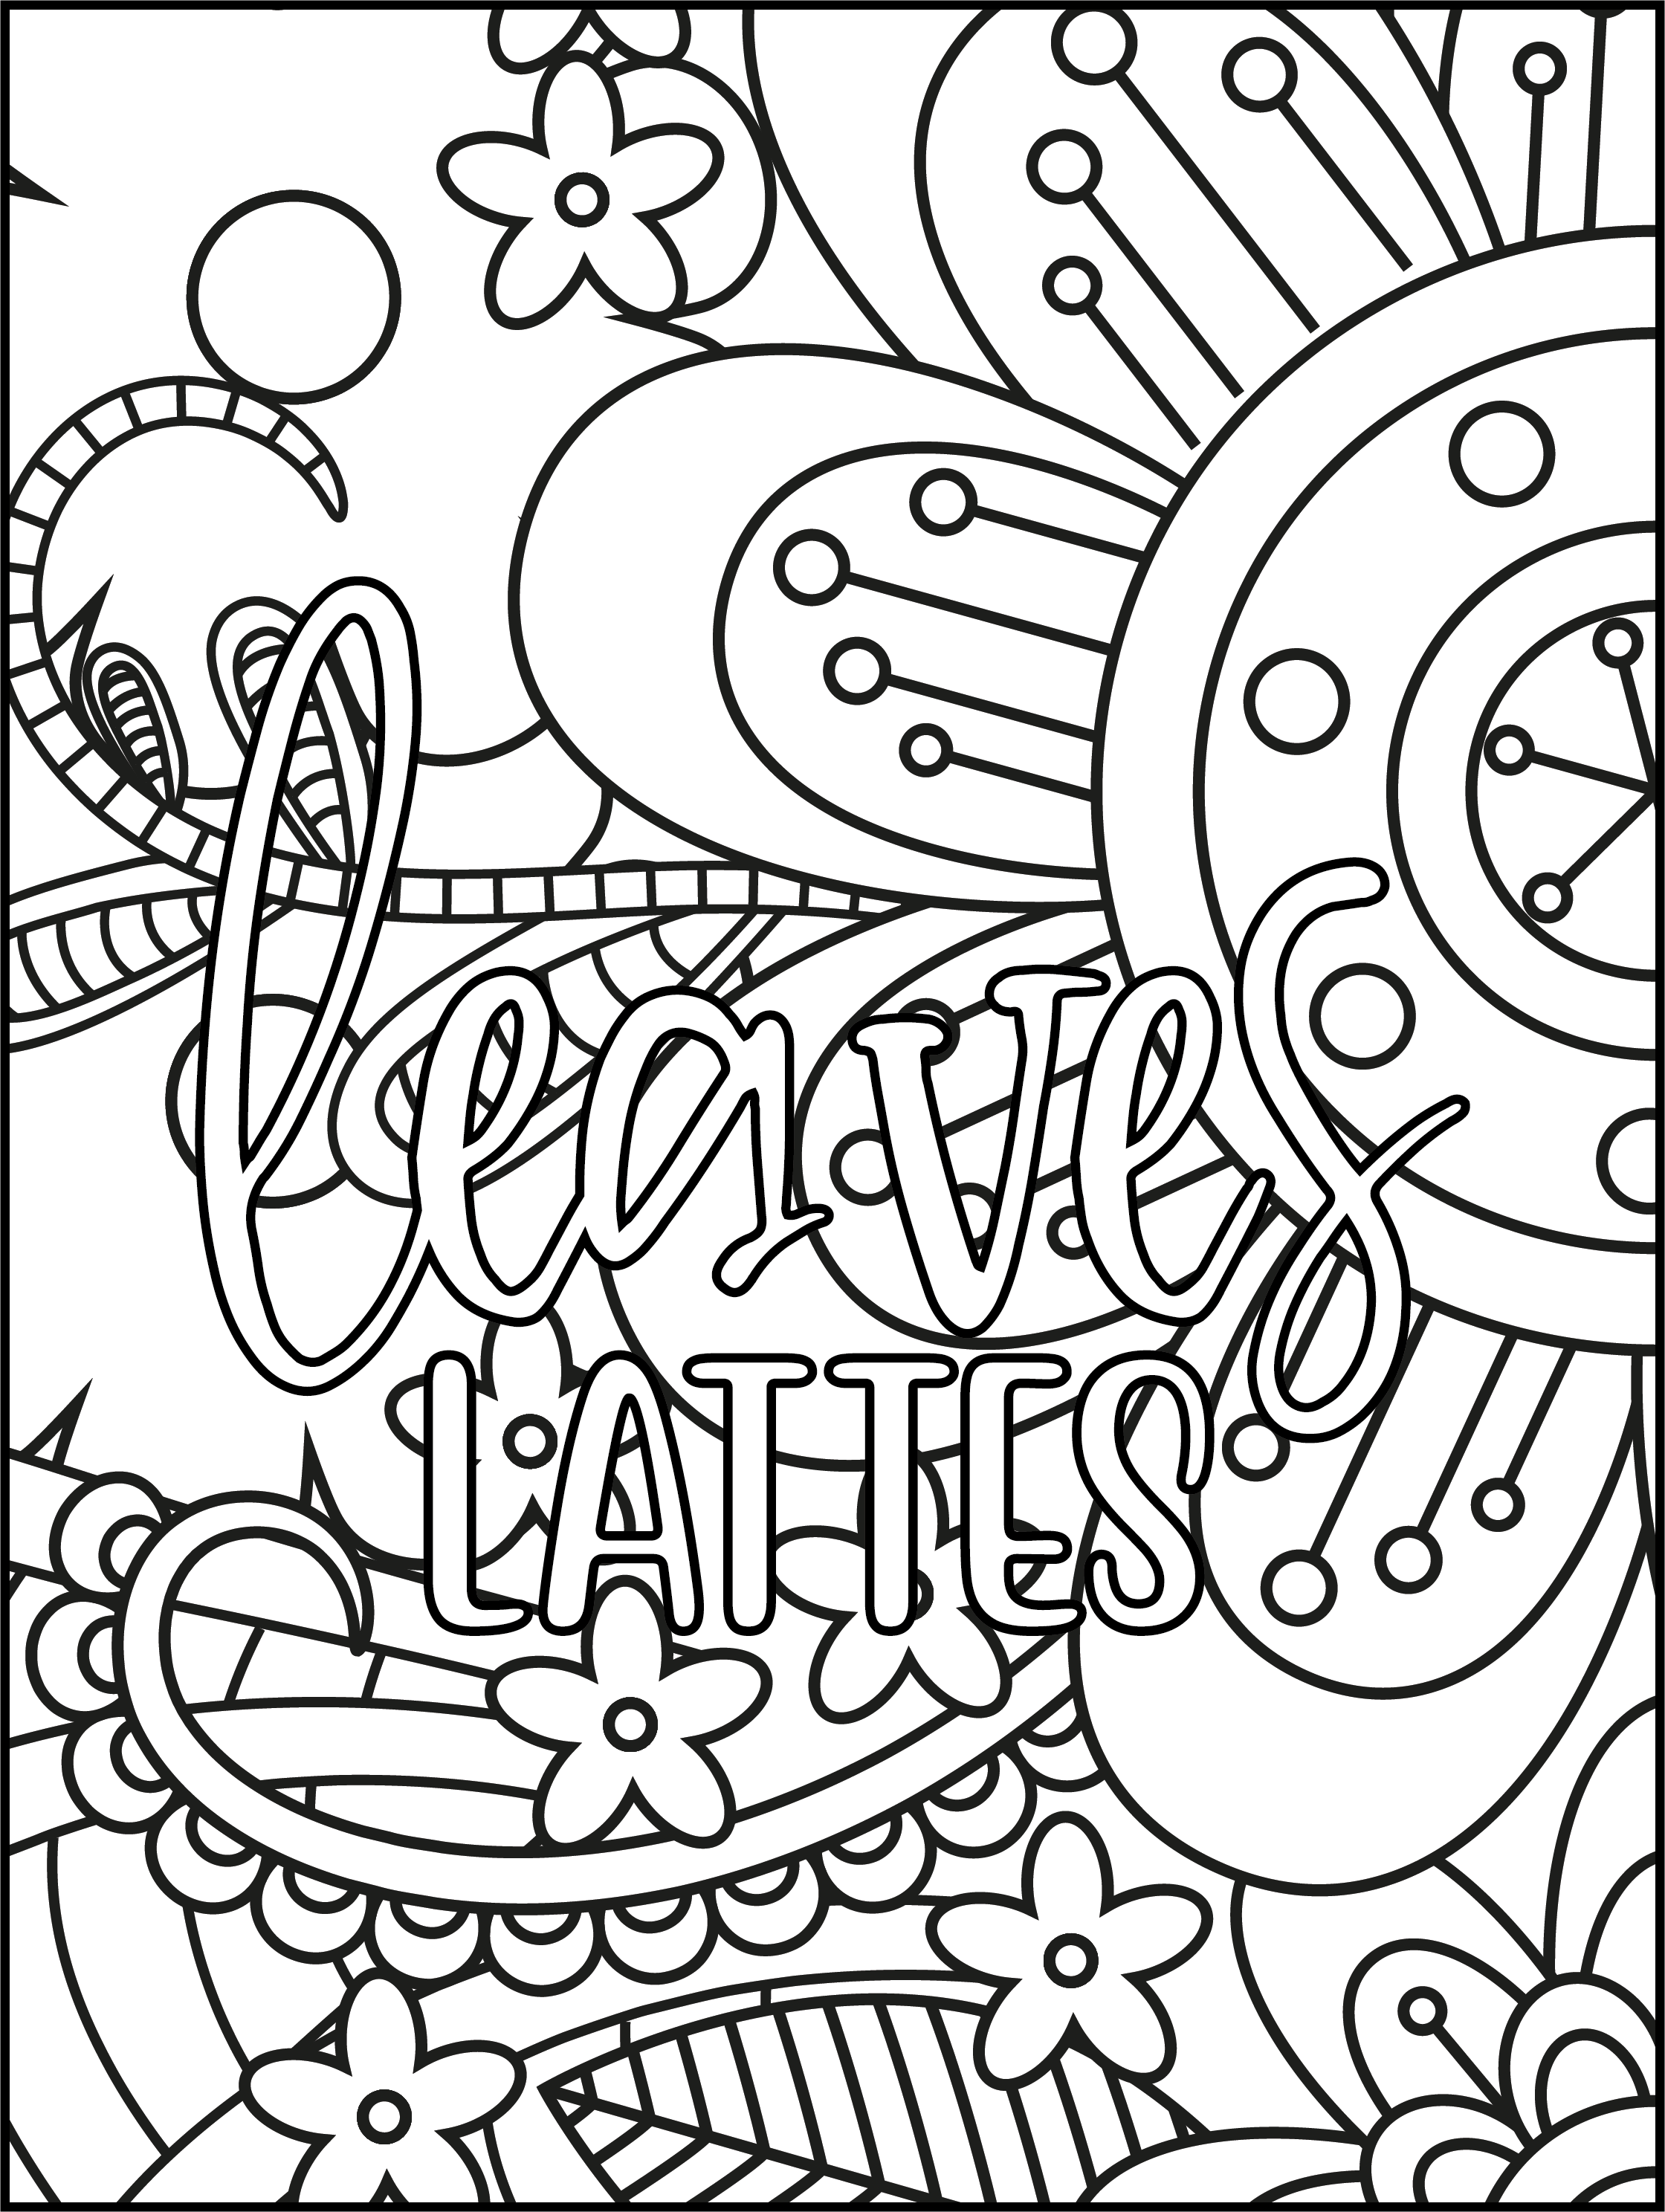 Get festive with inspiring quotes printable holiday coloring pages made by teachers